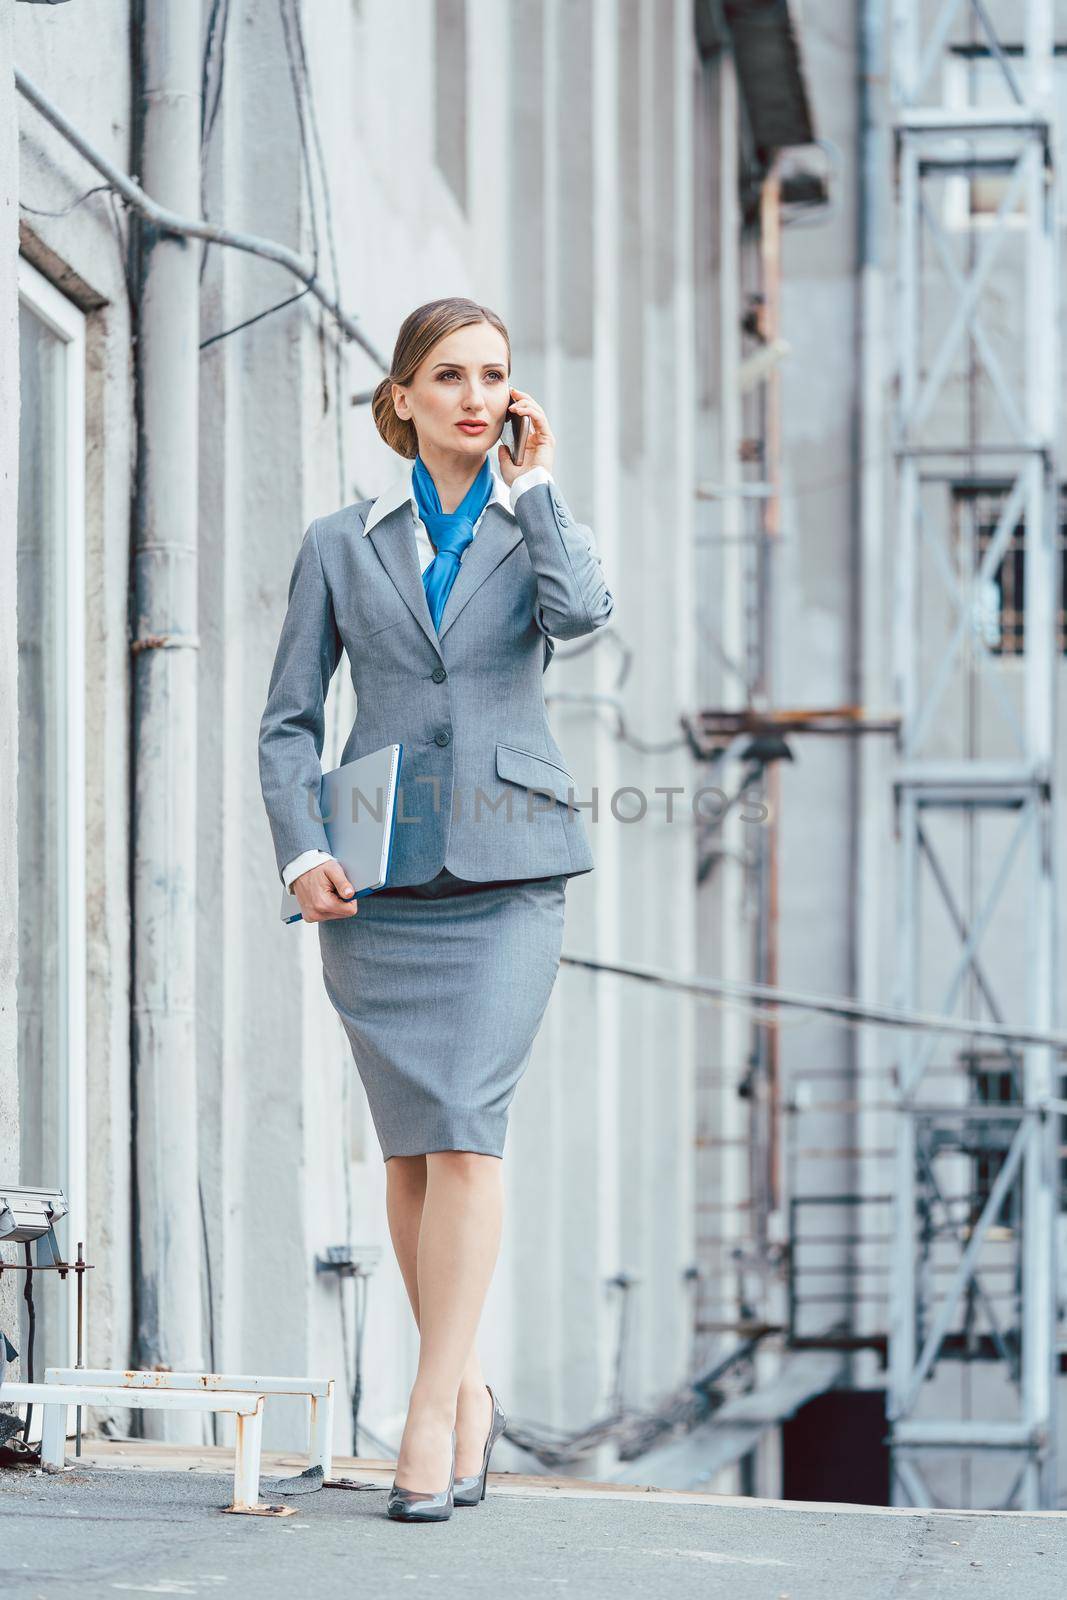 Business woman using her phone and holding a laptop in an industrial environment